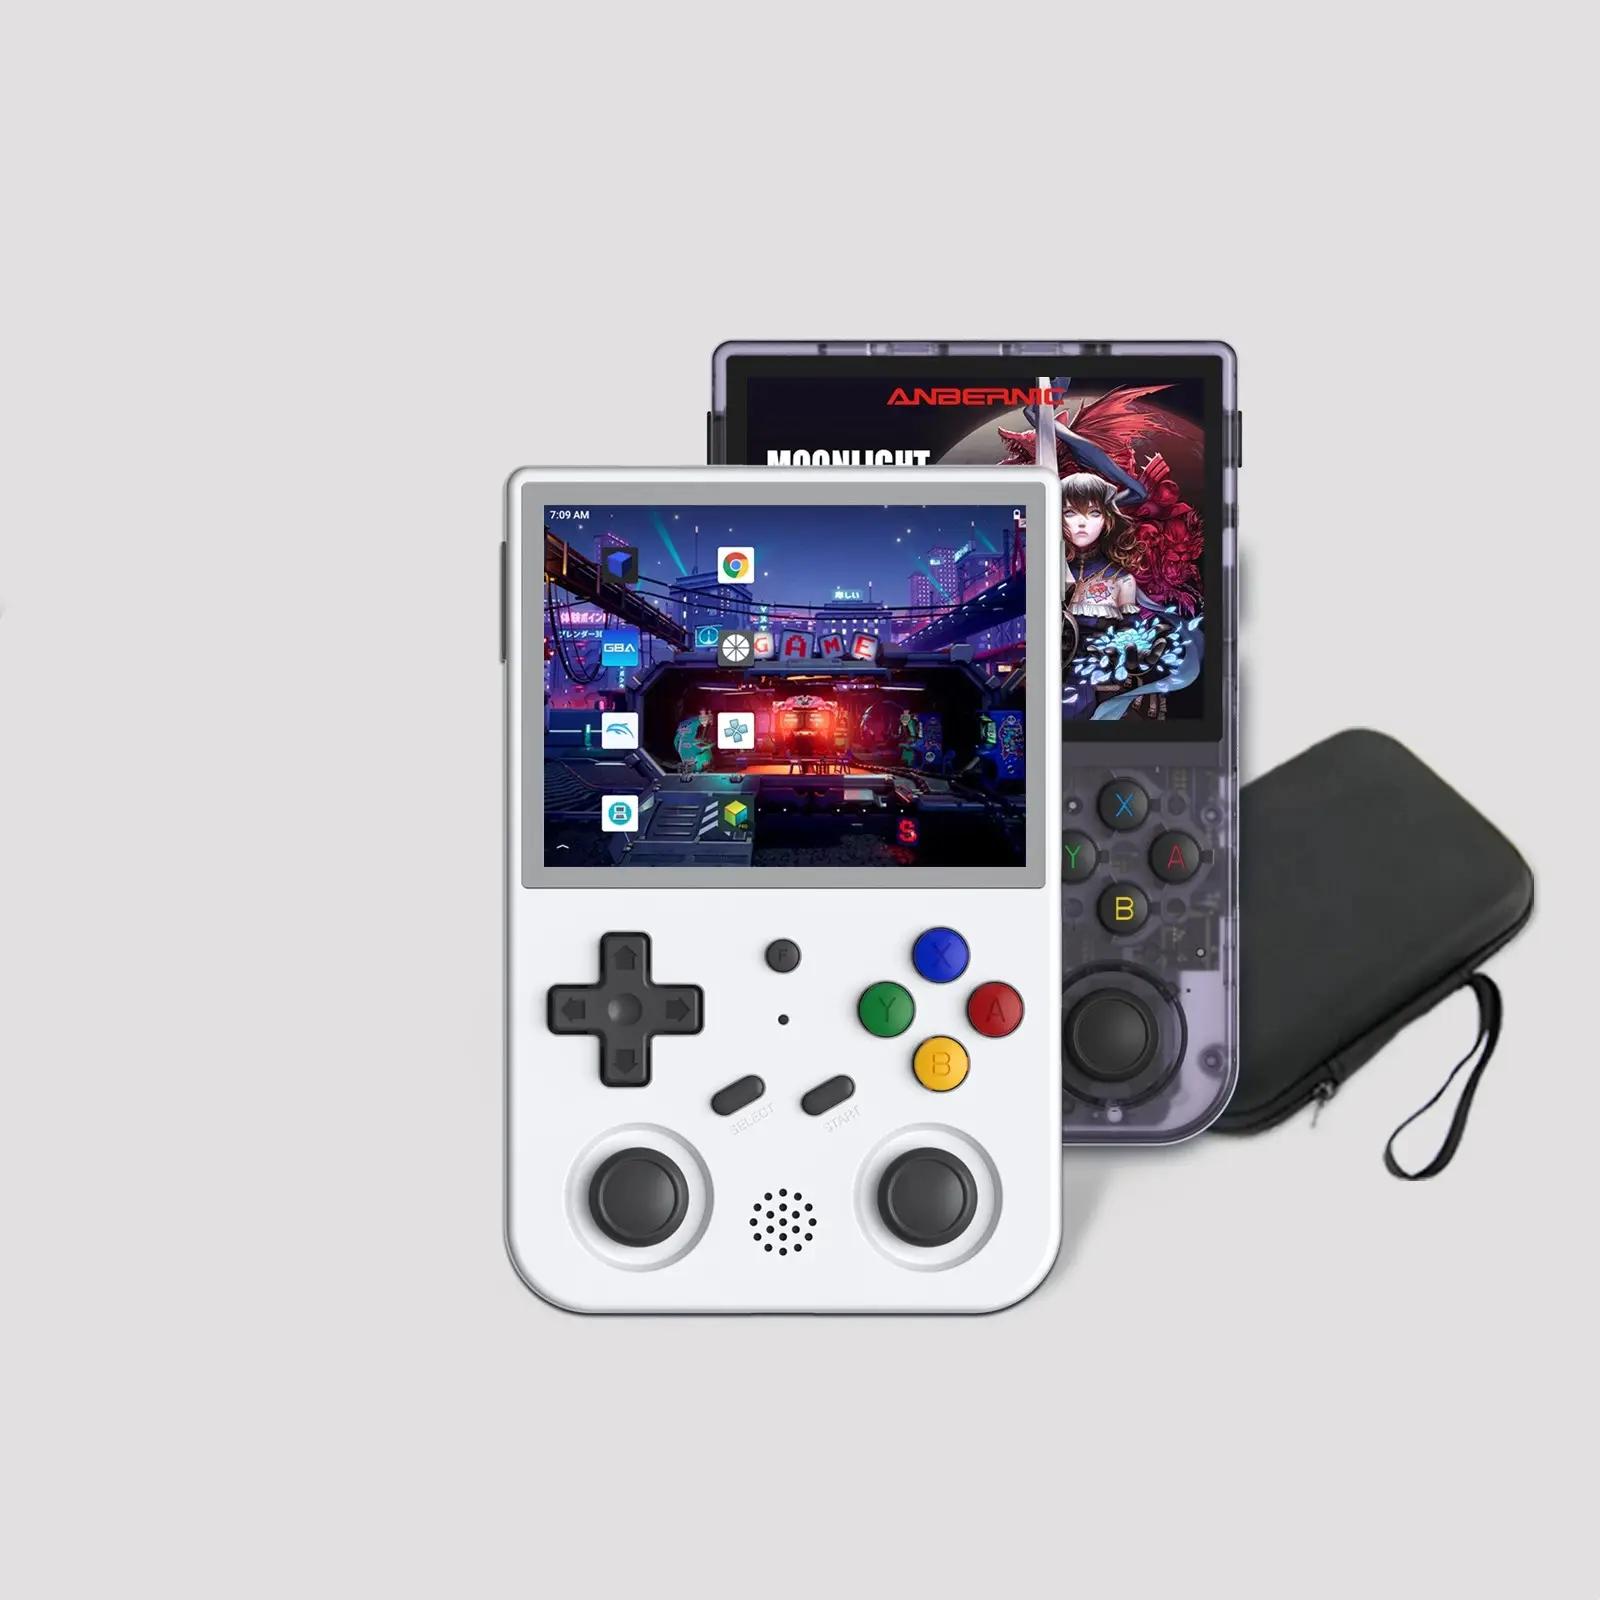 Anbernic Hot Selling Handheld 3.5-Inch Retro Video Game Consoles De Jeux Single System Gaming Console Rg353vs Rg353v